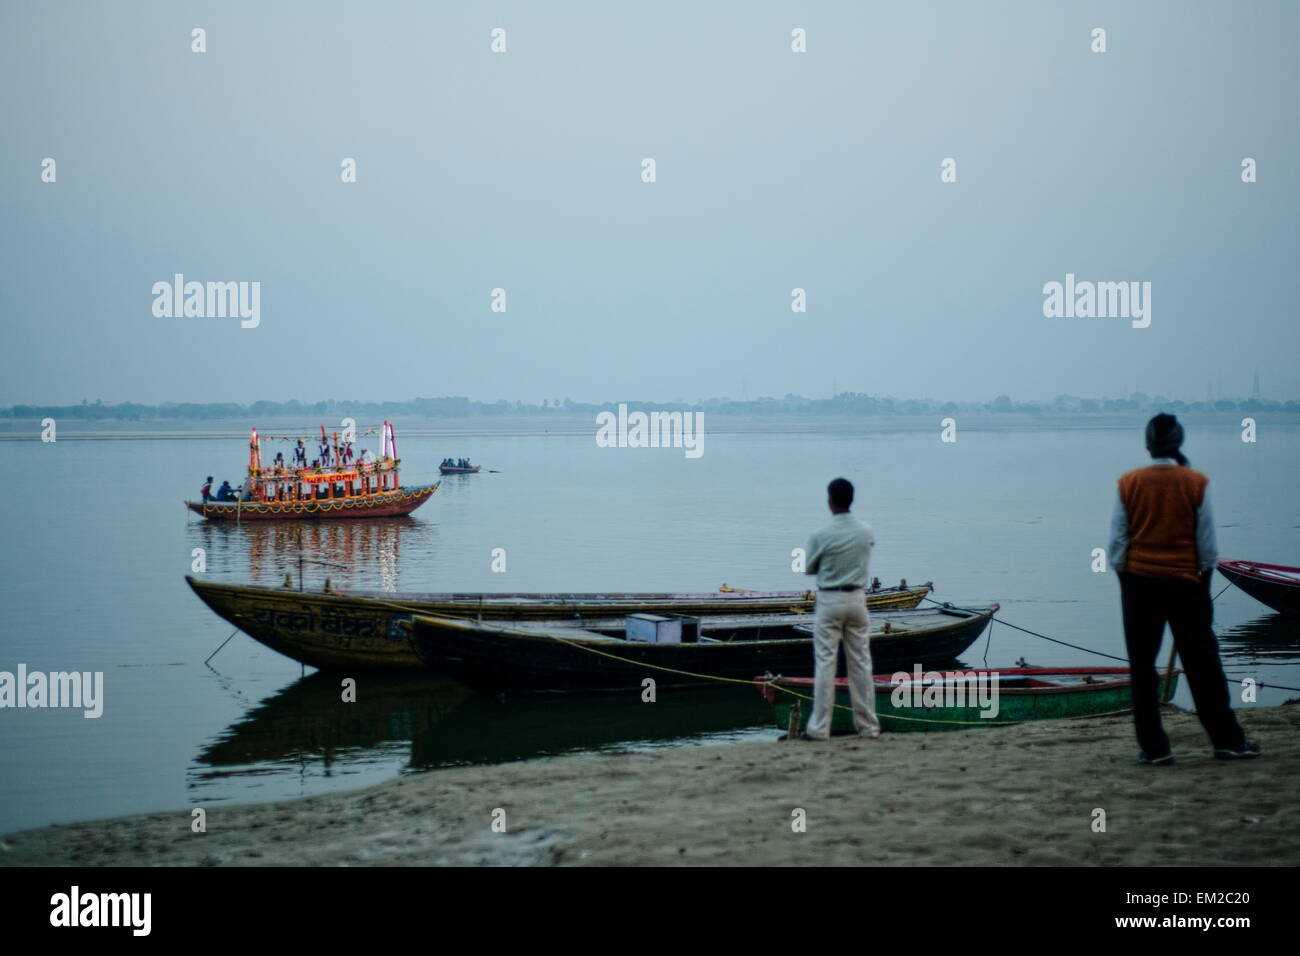 Music video being filmed in the Ganges Stock Photo